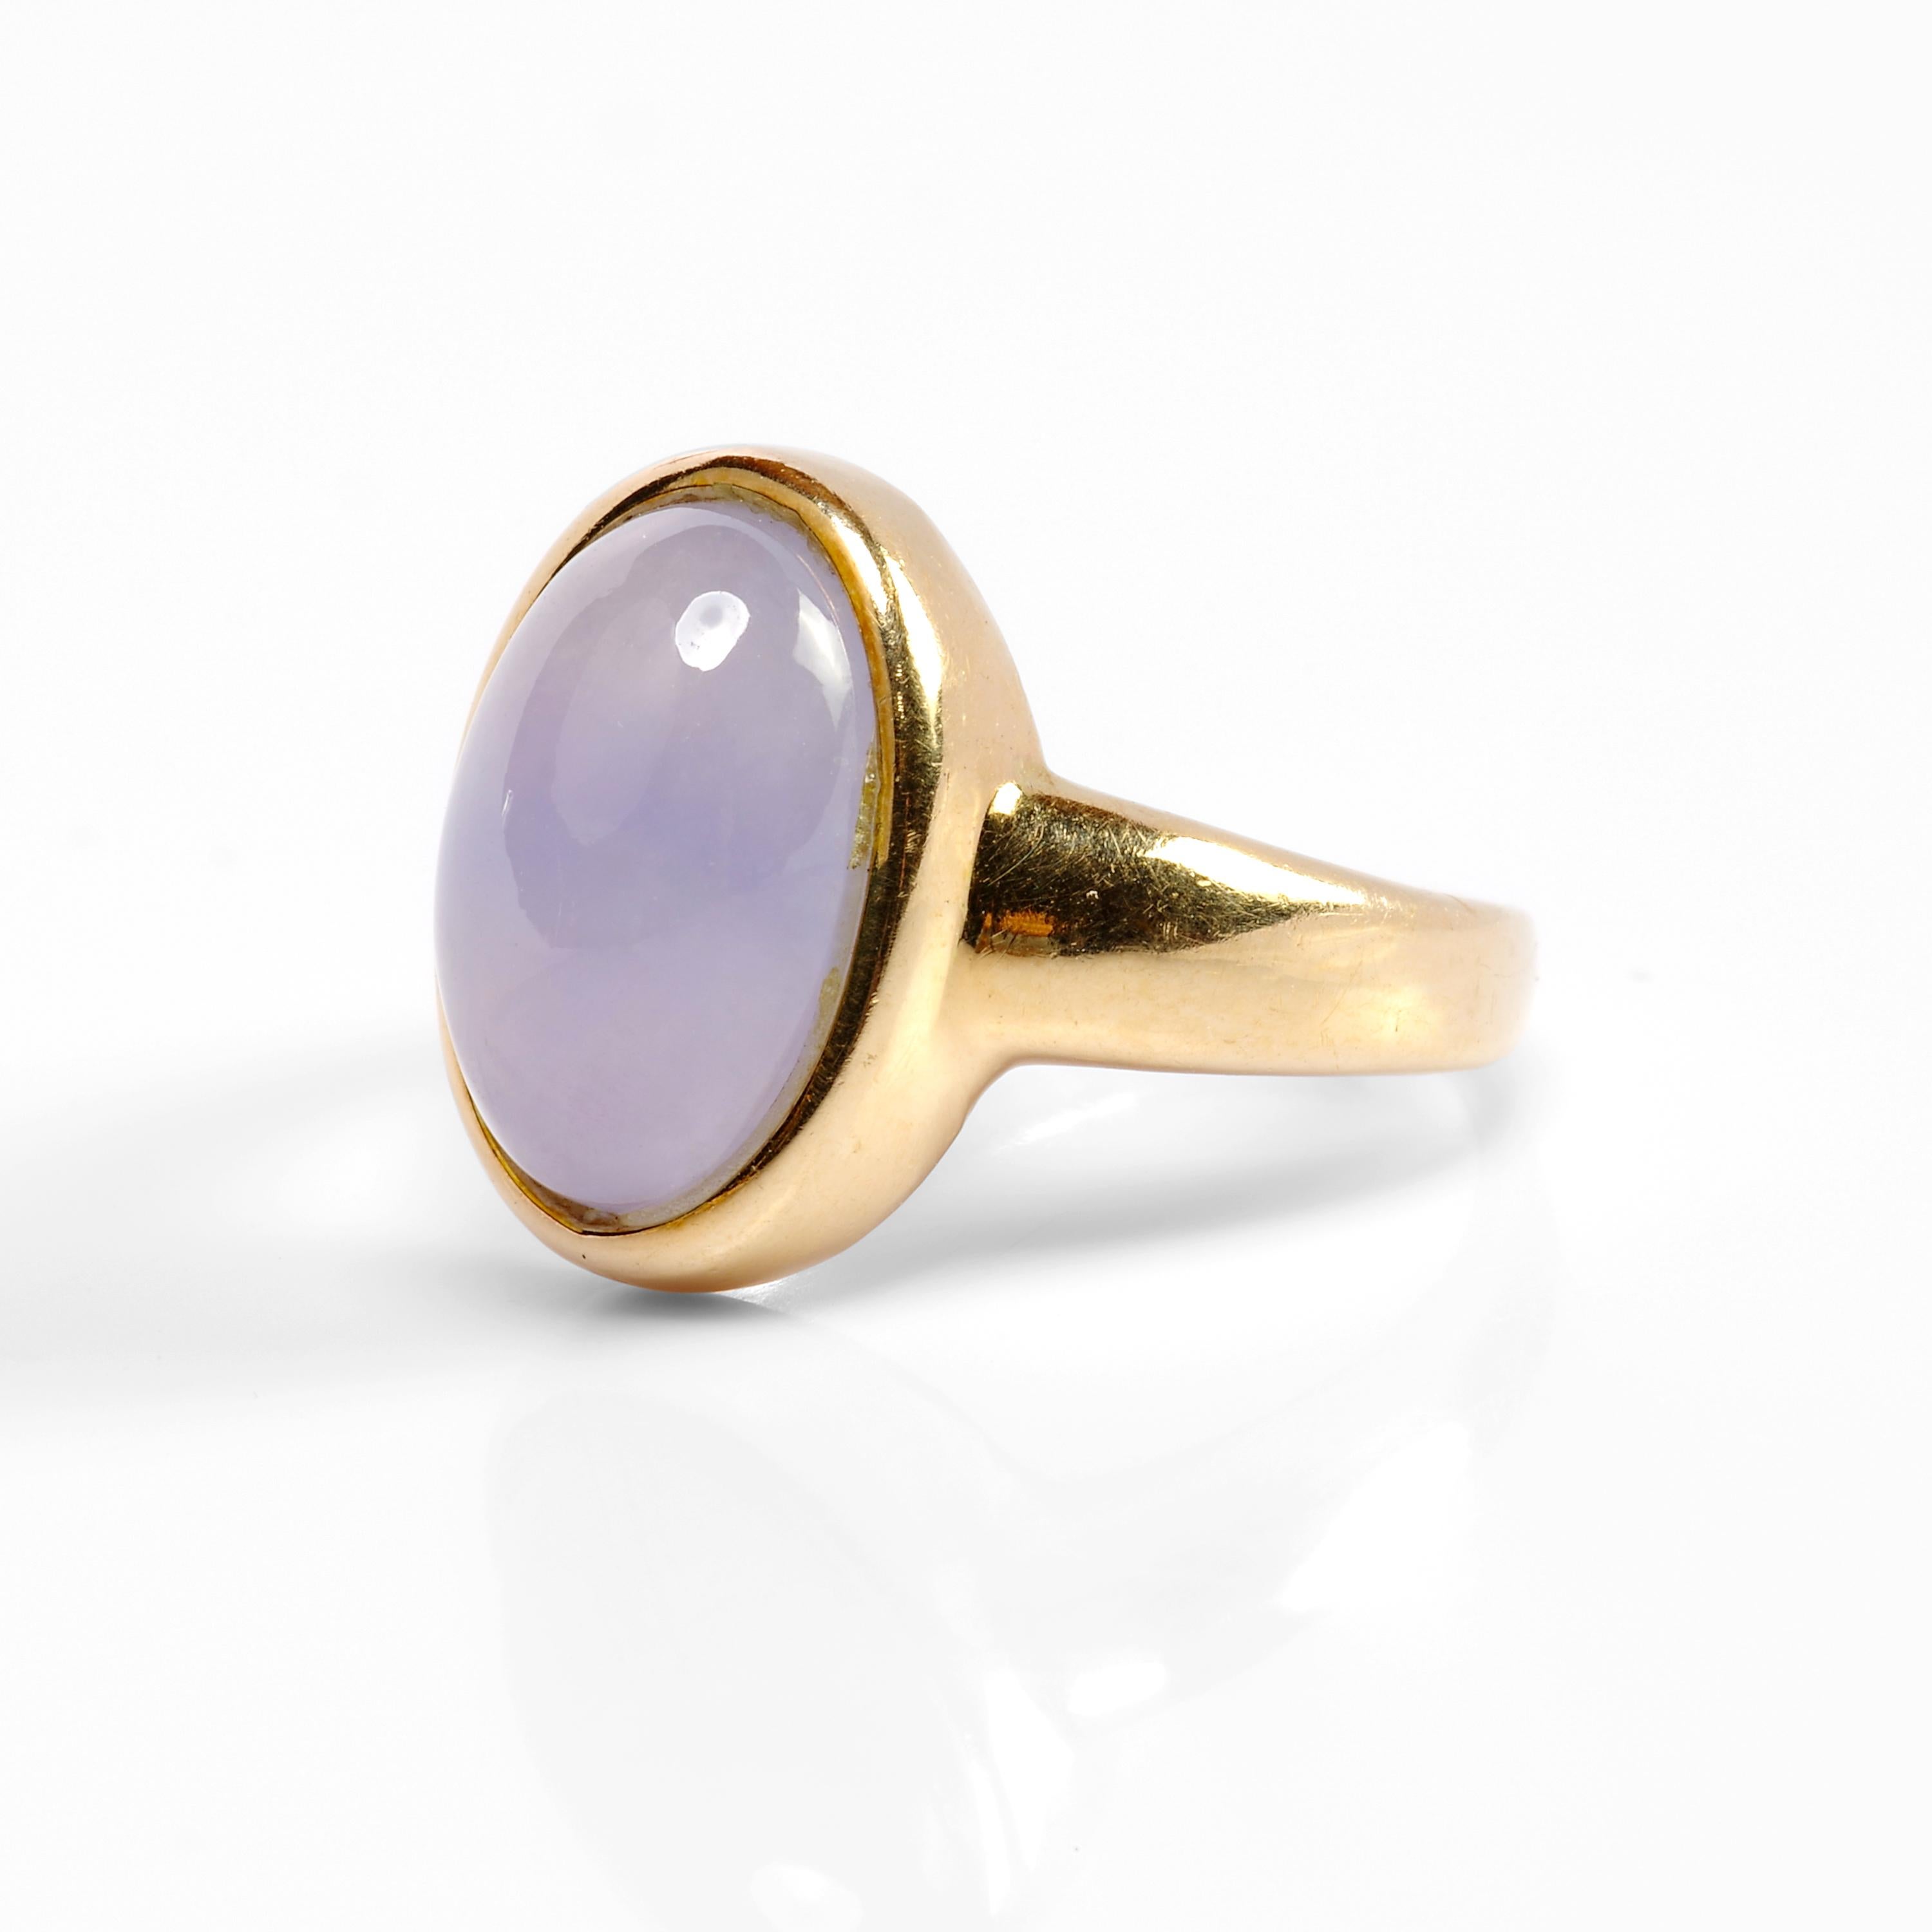 This small, sleek little ring is a Midcentury gem -literally. The 14K yellow gold band holds a lovely lavender jade double cabochon that is certified to be 100% natural and free of any dyes or polymers. The jade gem has excellent translucency and an